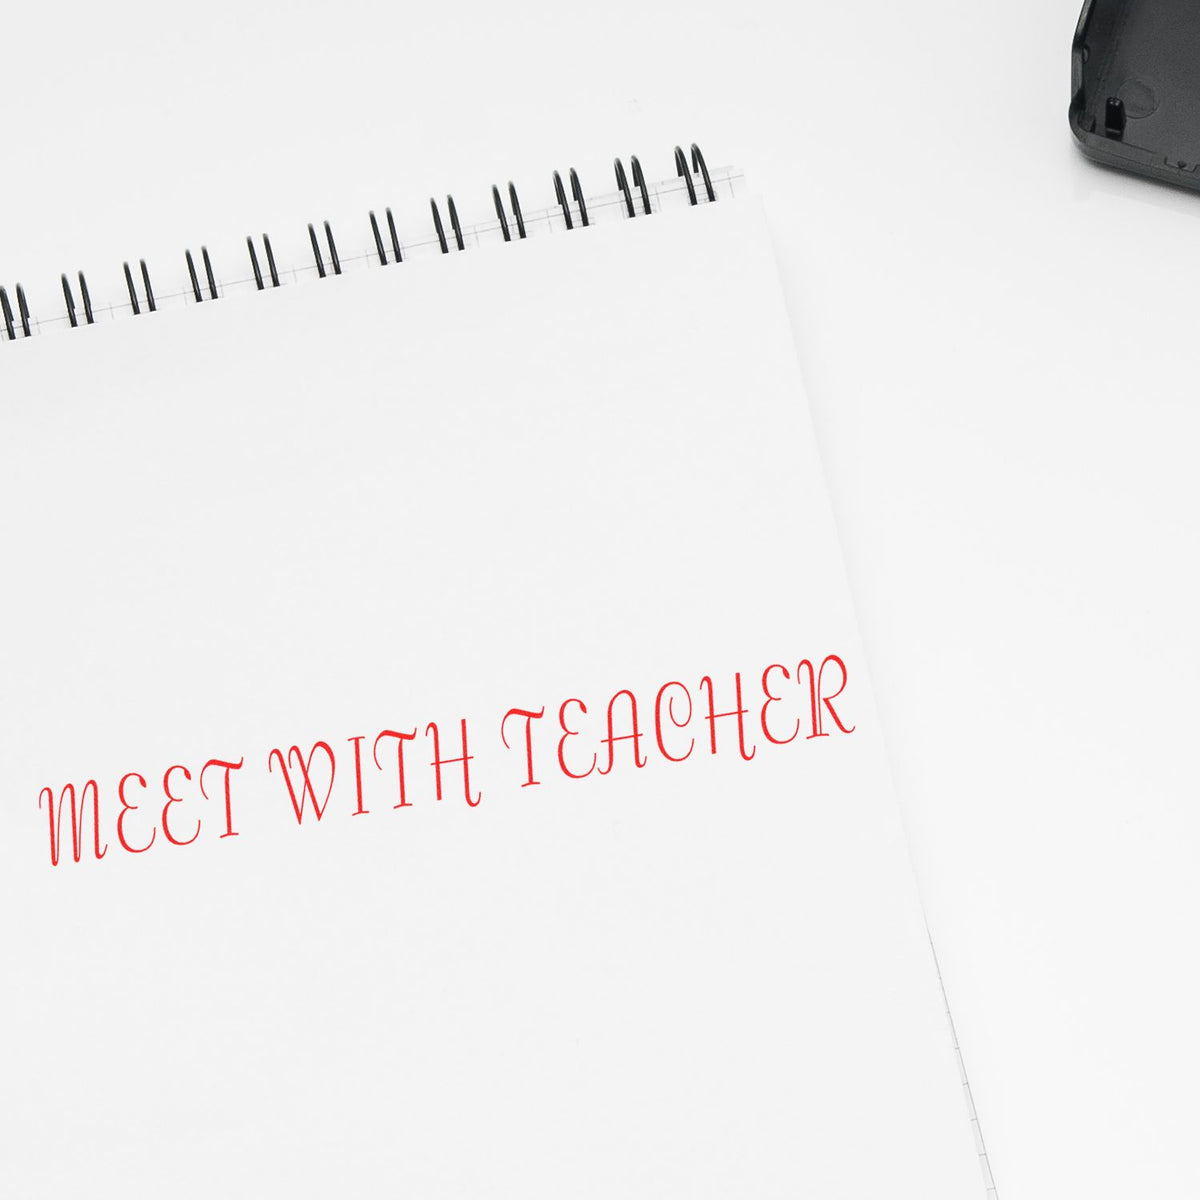 Large Meet With Teacher Rubber Stamp In Use Photo